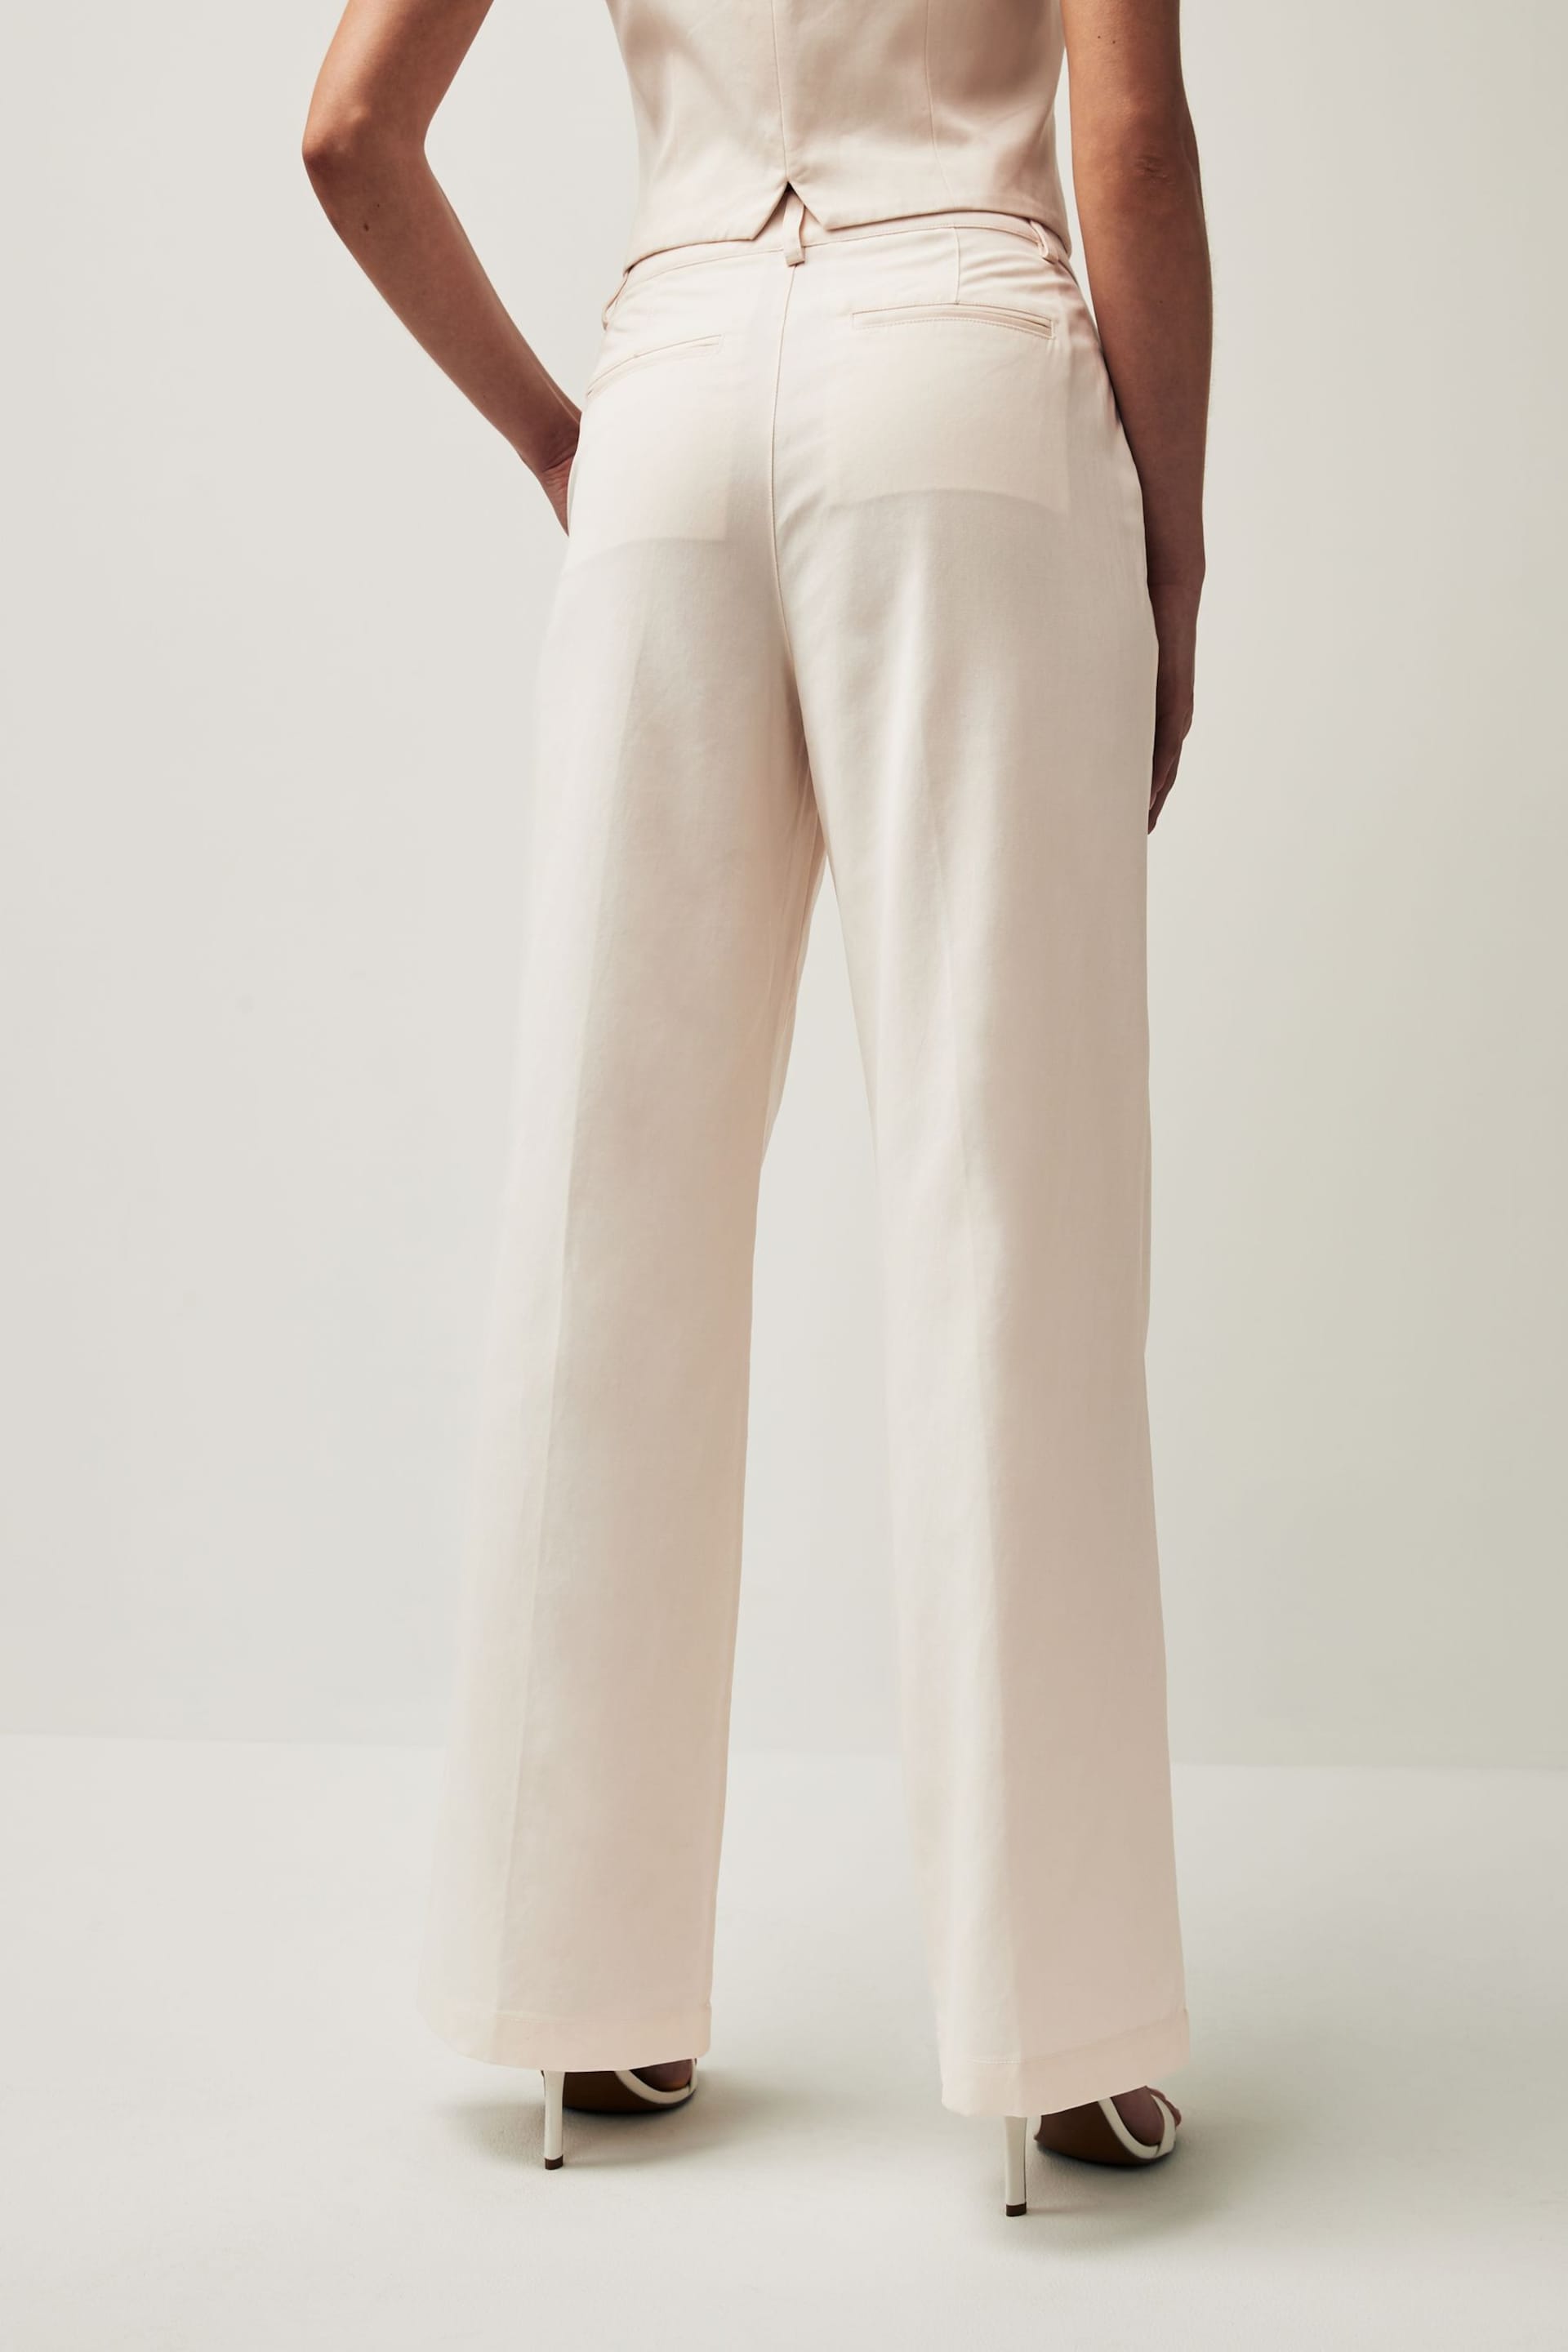 Paige Merano Wide Leg White Trousers - Image 3 of 5